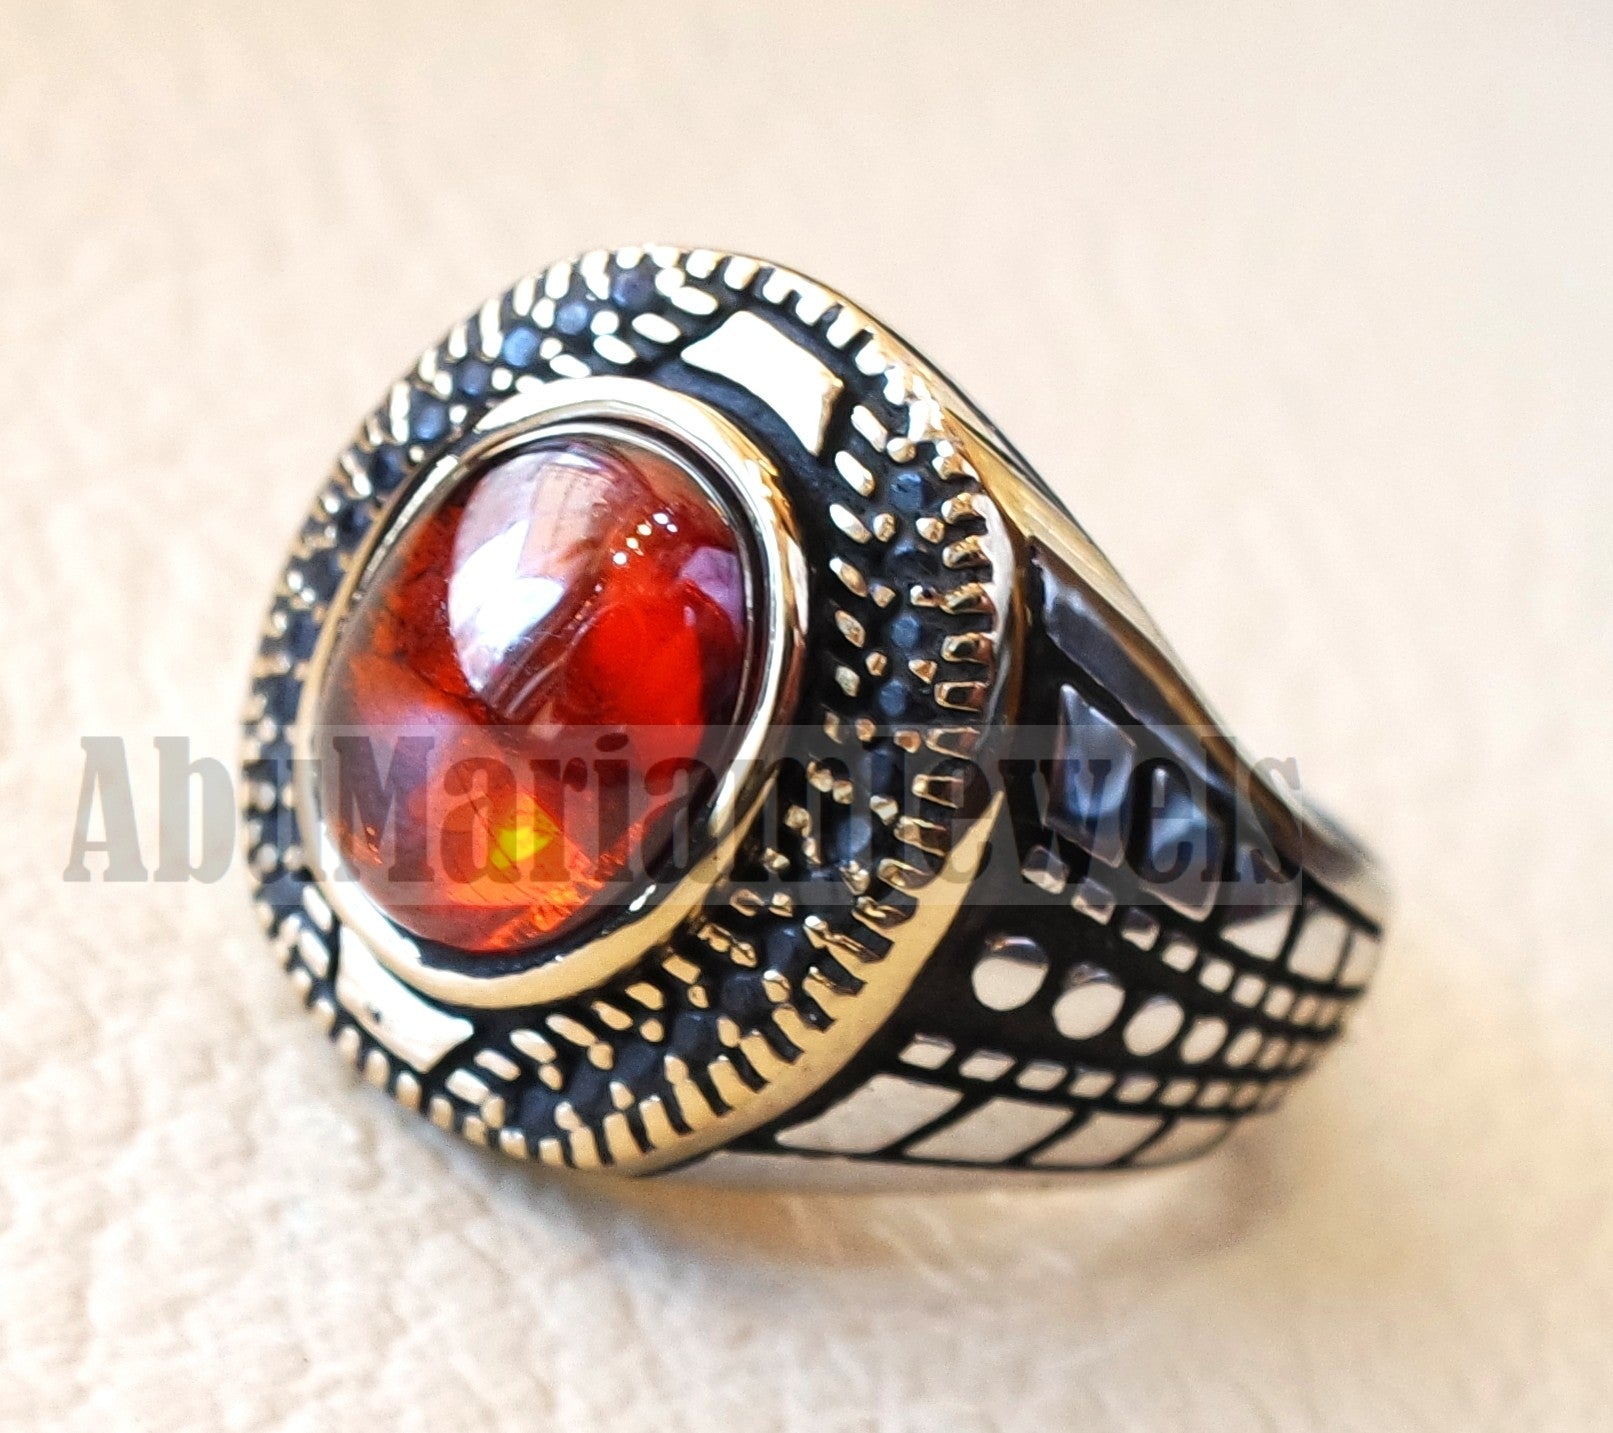 Oval red ruby garnet color synthetic imitation stone sterling silver 925 bronze stunning ring all sizes middle eastern jewelry black CZ